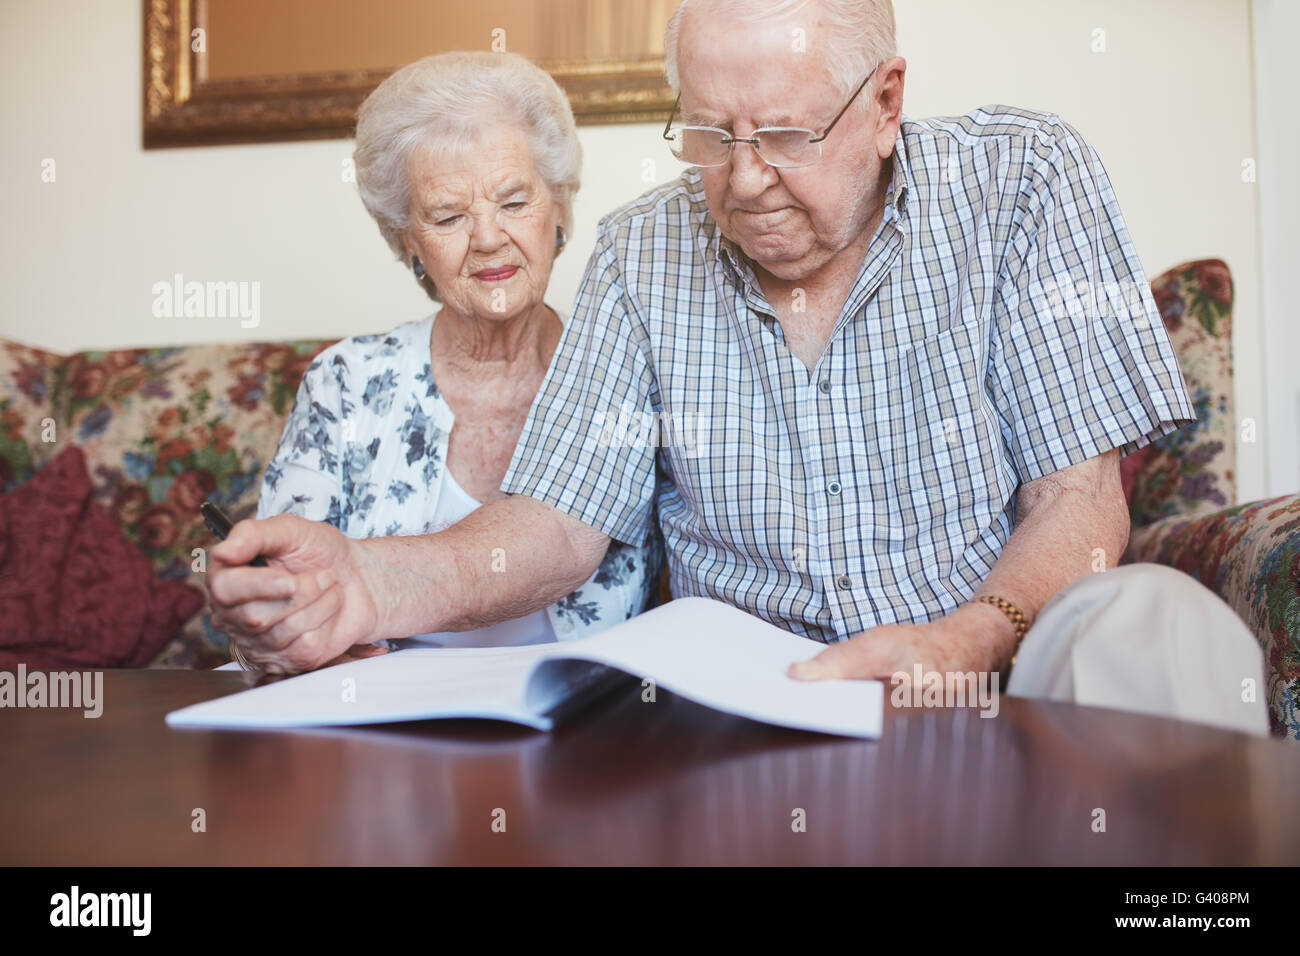 Indoor shot of mature couple at home reading paperwork together. Senior man and woman sitting on sofa going through some retirem Stock Photo